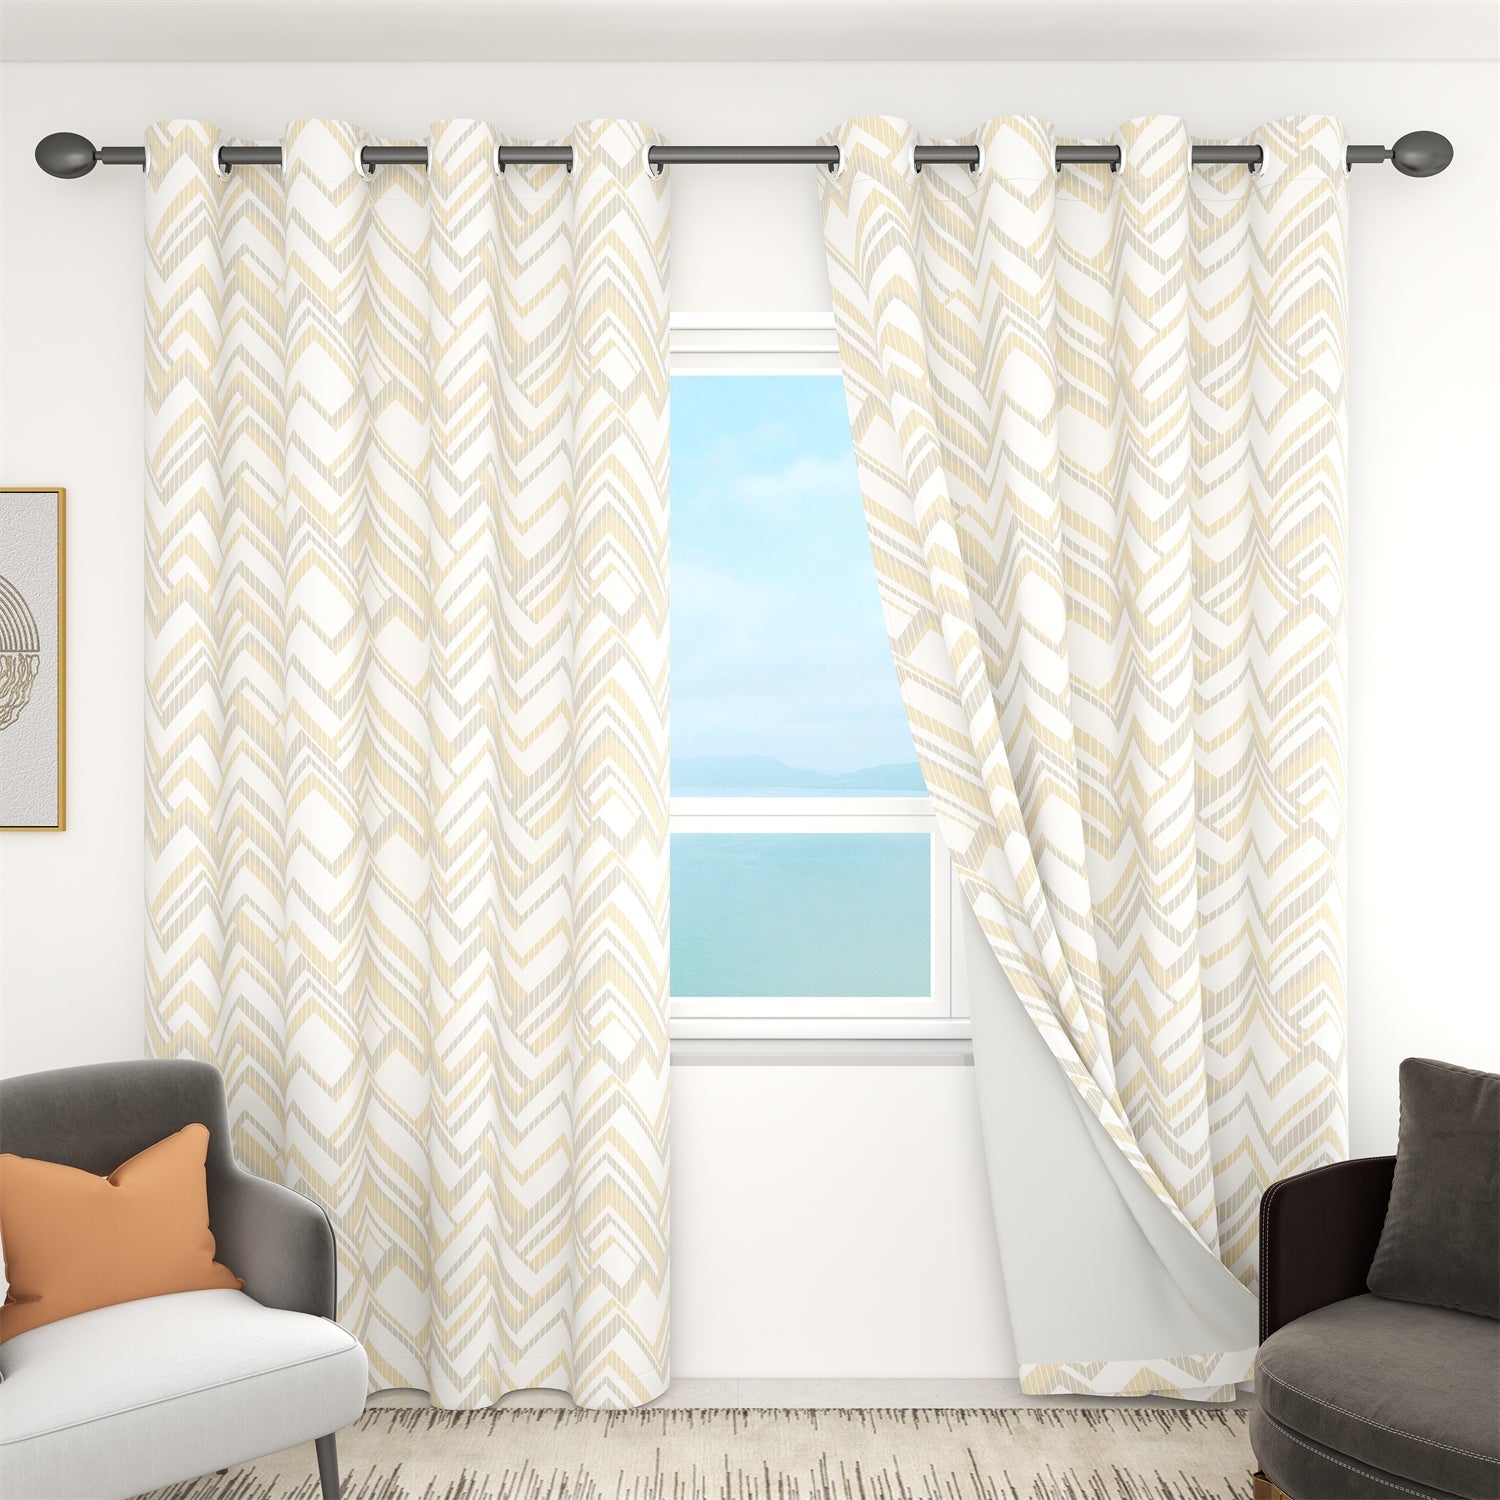 Silver Grommet Blackout Curtains For Living Room And Bedroom 2 Panels KGORGE Store